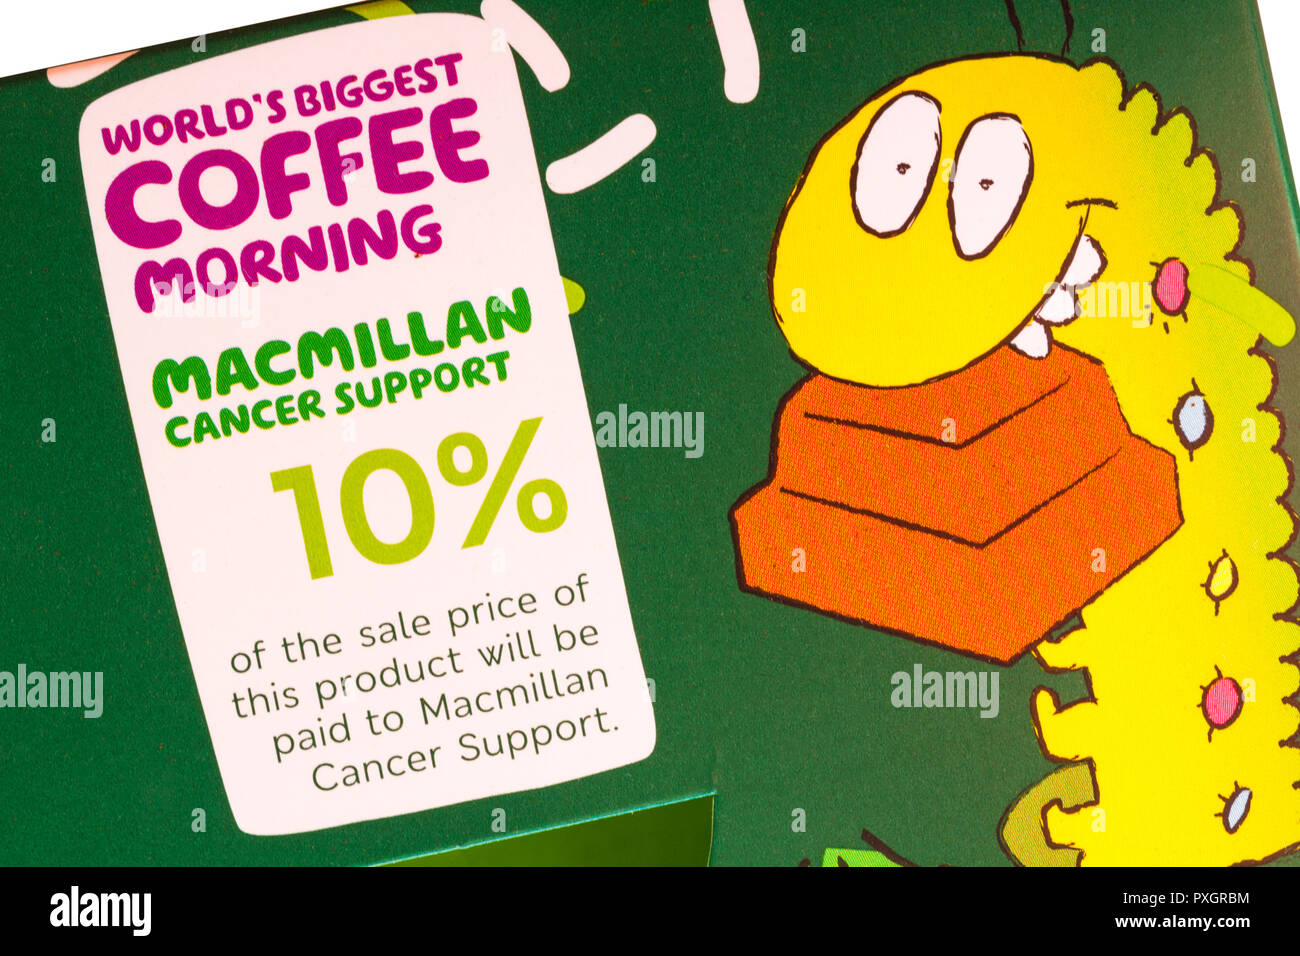 10% to Macmillan Cancer Support on Marks & Spencer Colin the Caterpillar chocolate cake - world's biggest coffee morning Stock Photo